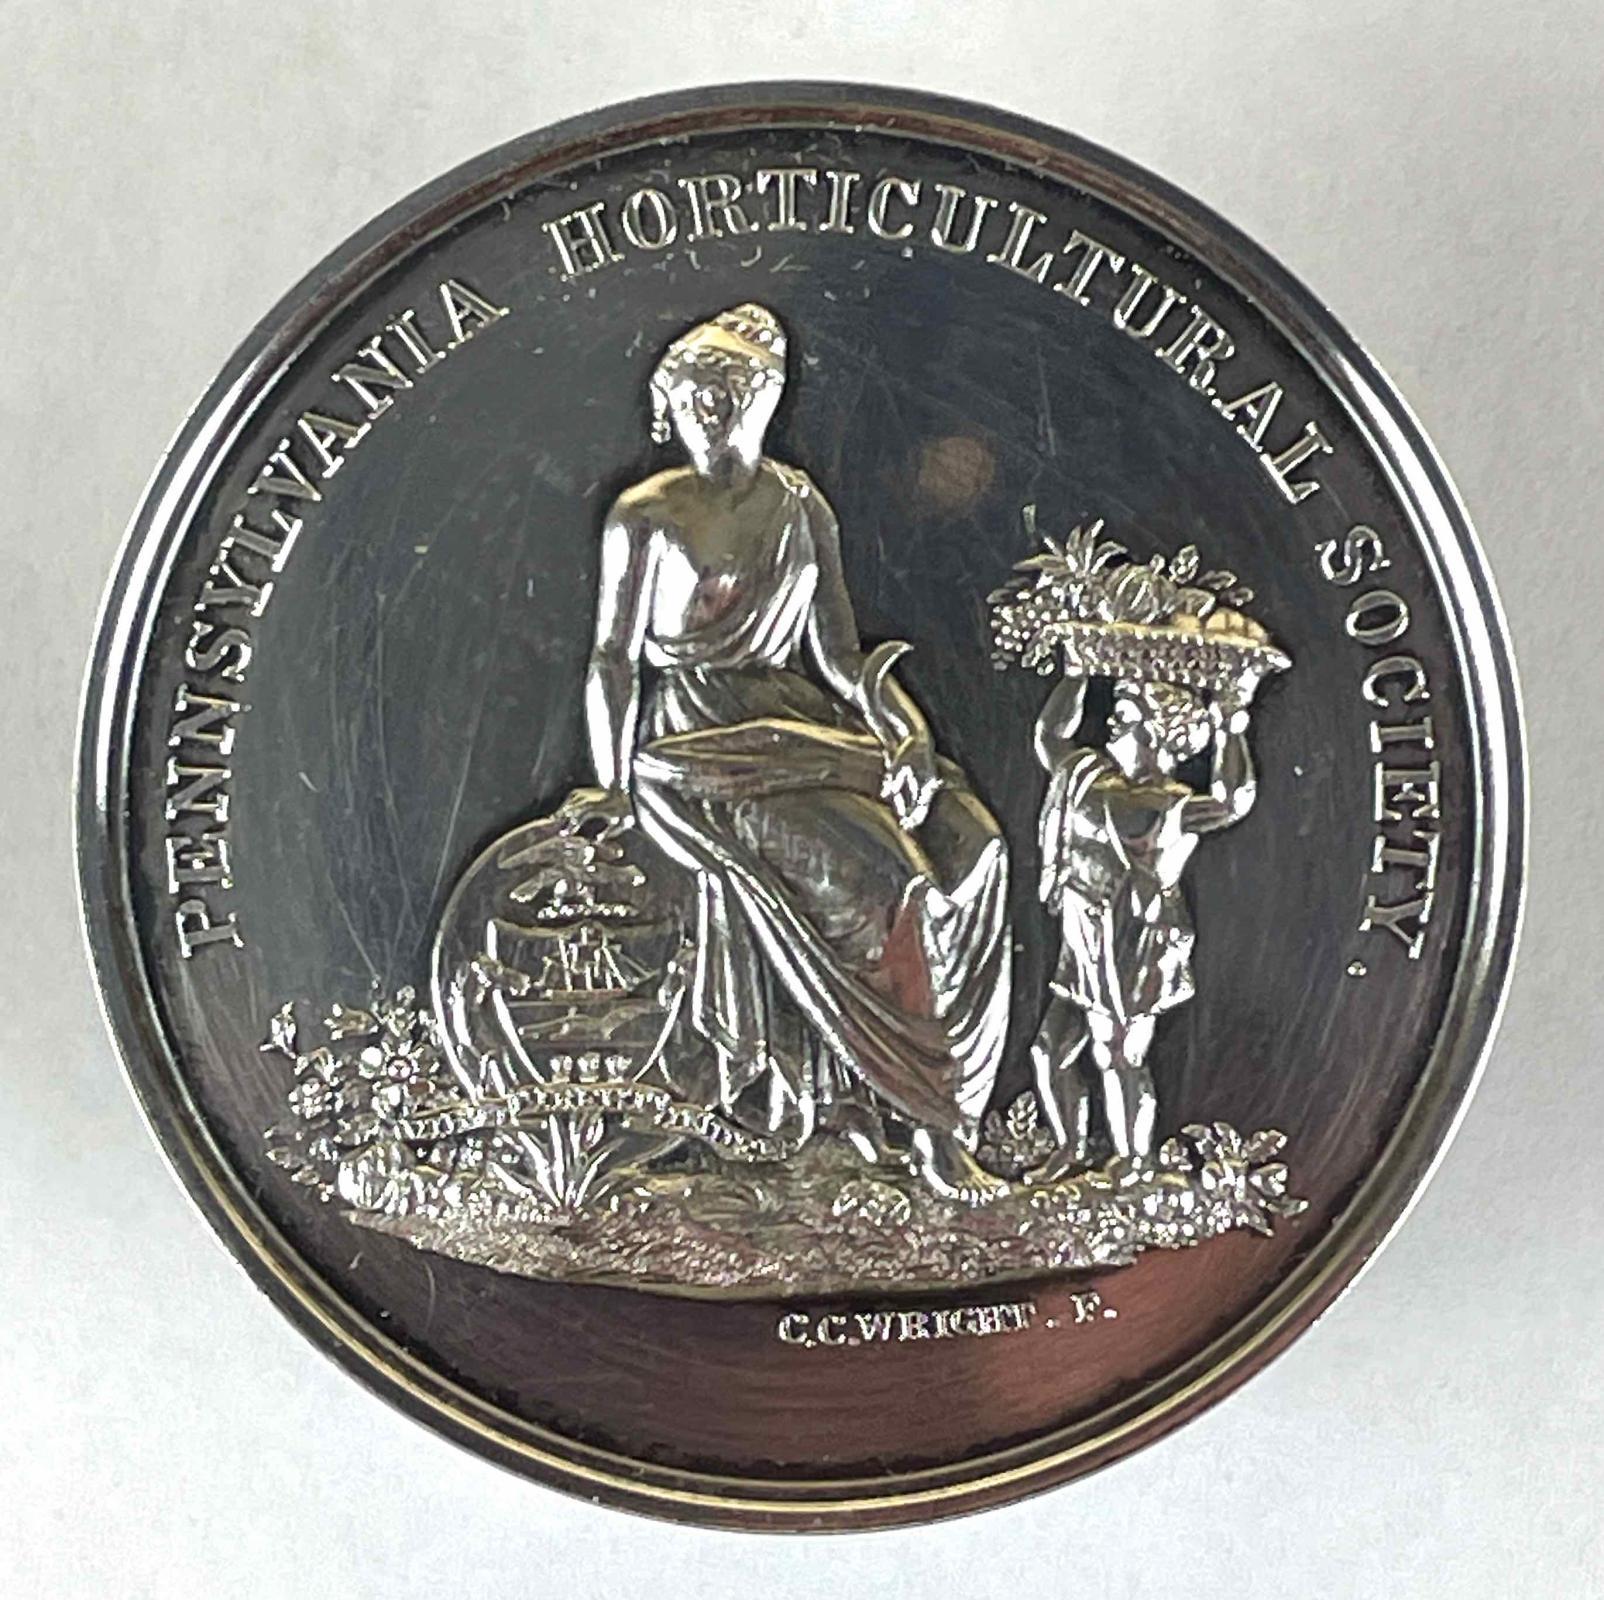 2014.1 peach medal front